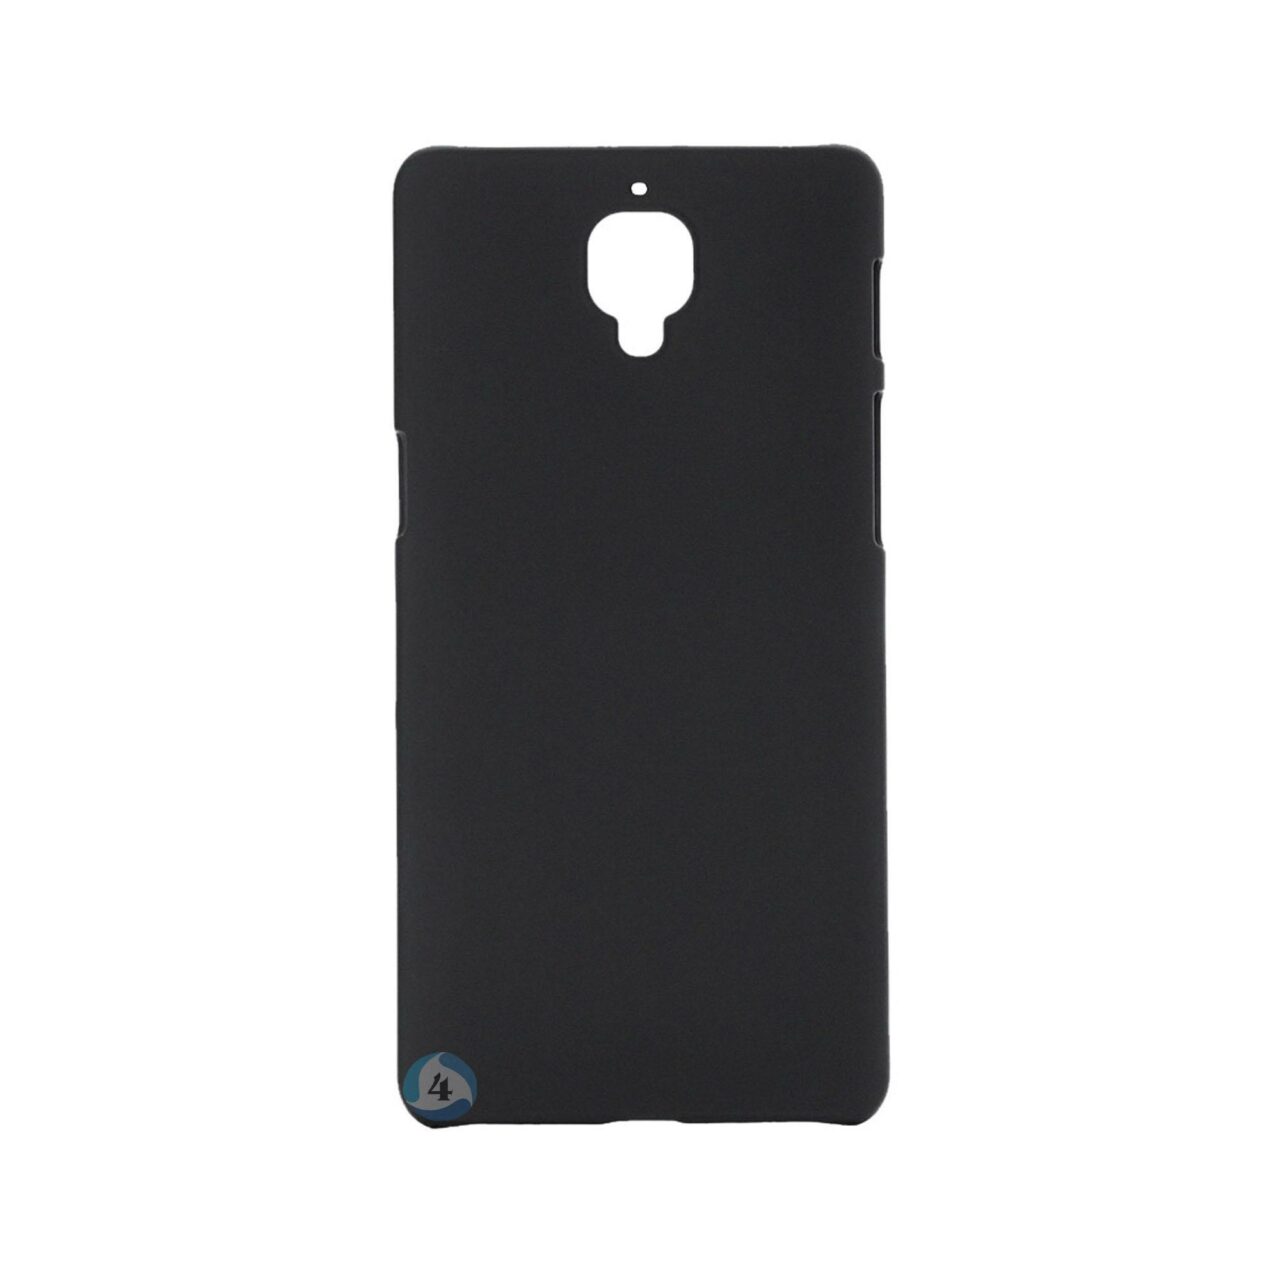 Oneplus 3t backcover black